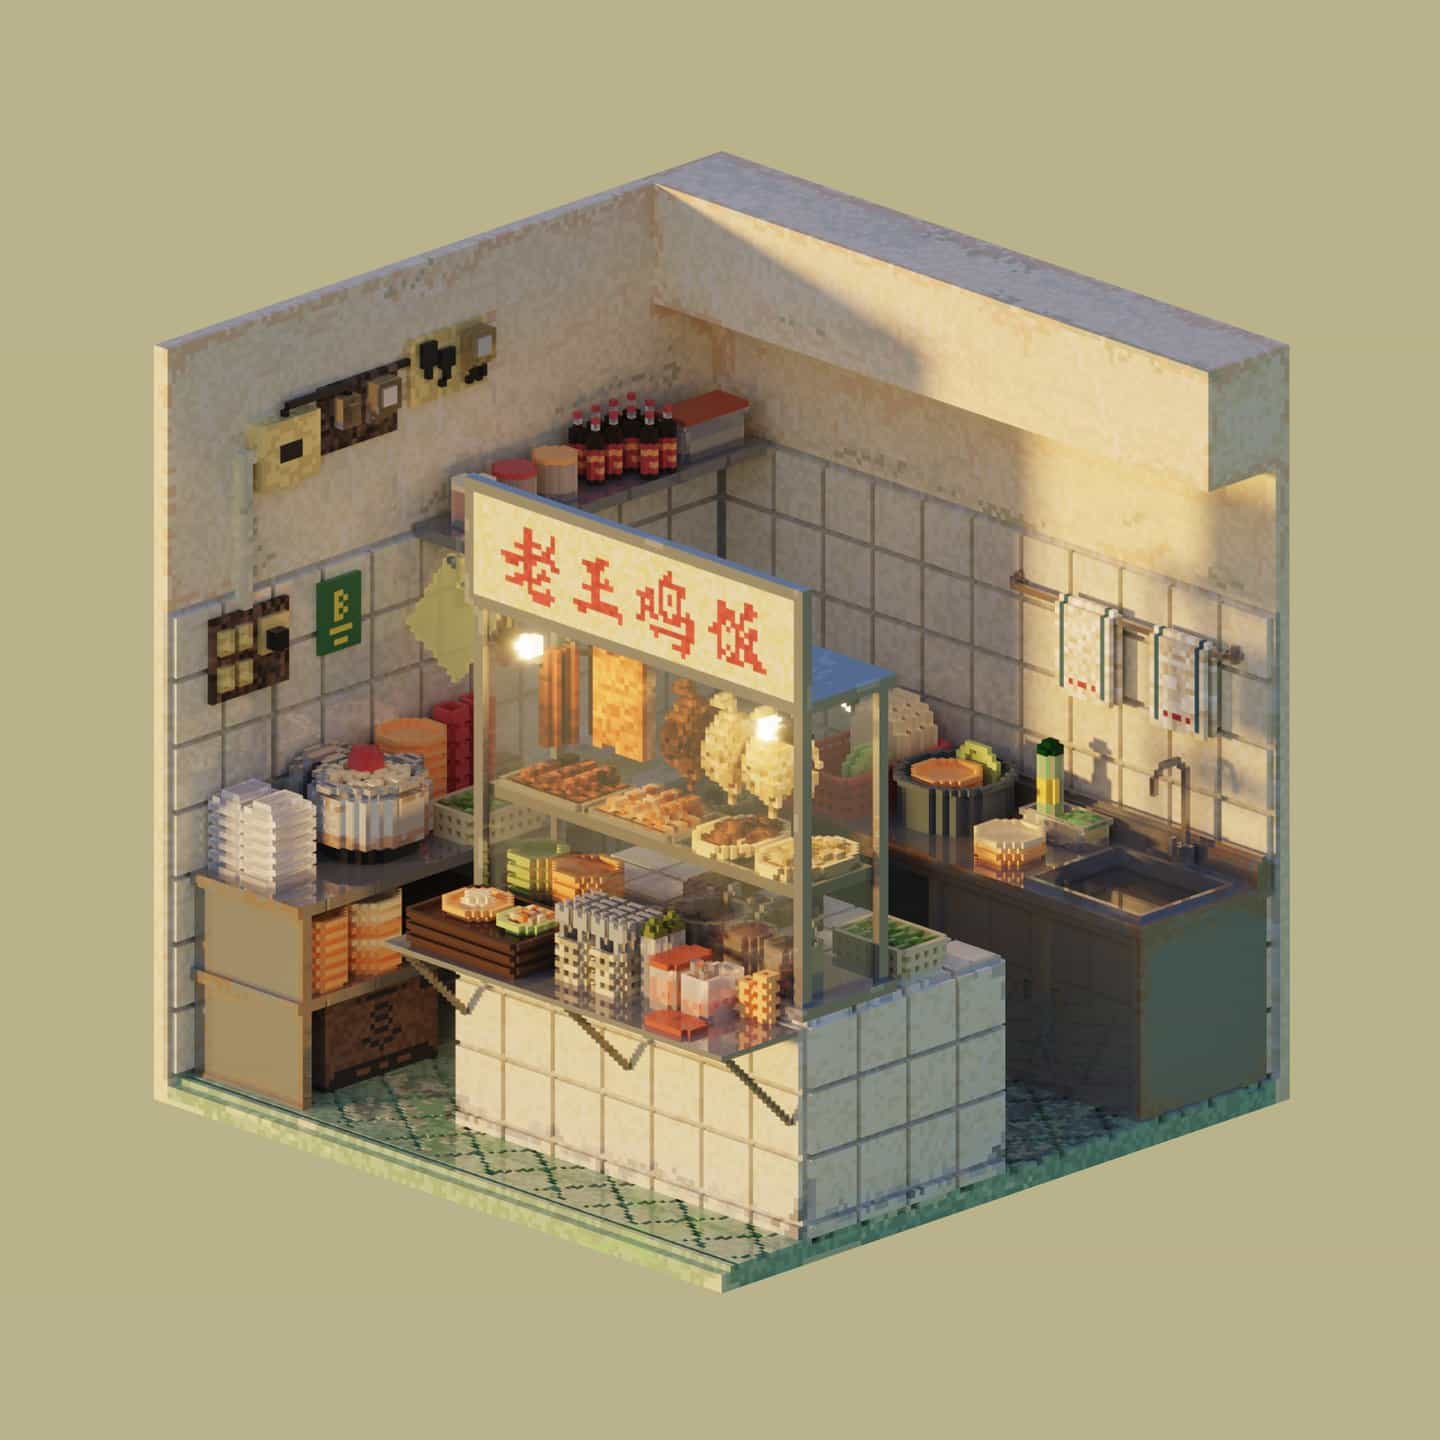 Shin Oh: Chicken Rice Stall, serie Tiny Voxel Shops de 126³ (Copyright © Shin Oh, 2021)